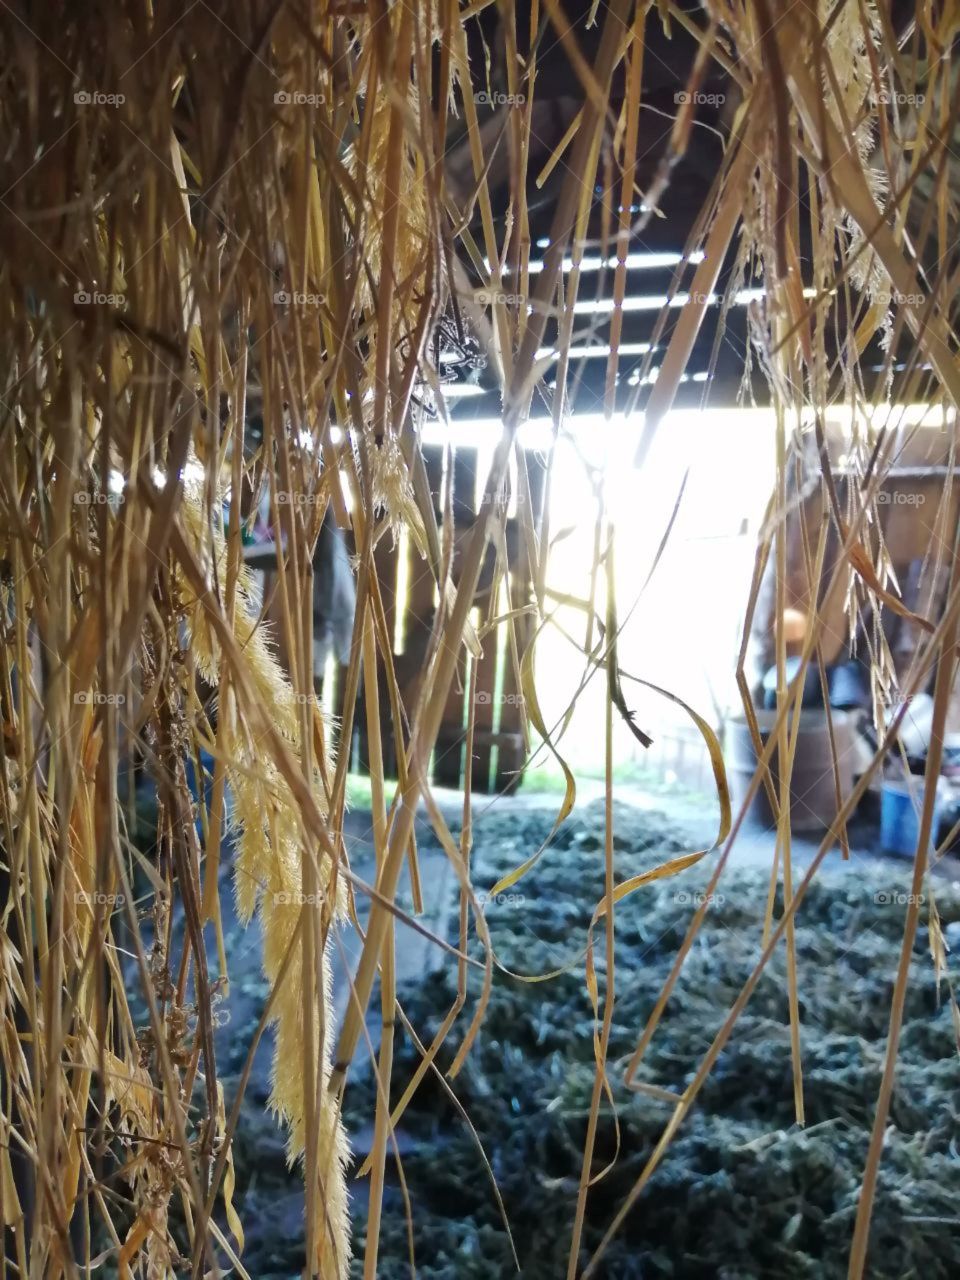 Hay and straw in the shed against the backdrop of the open gate